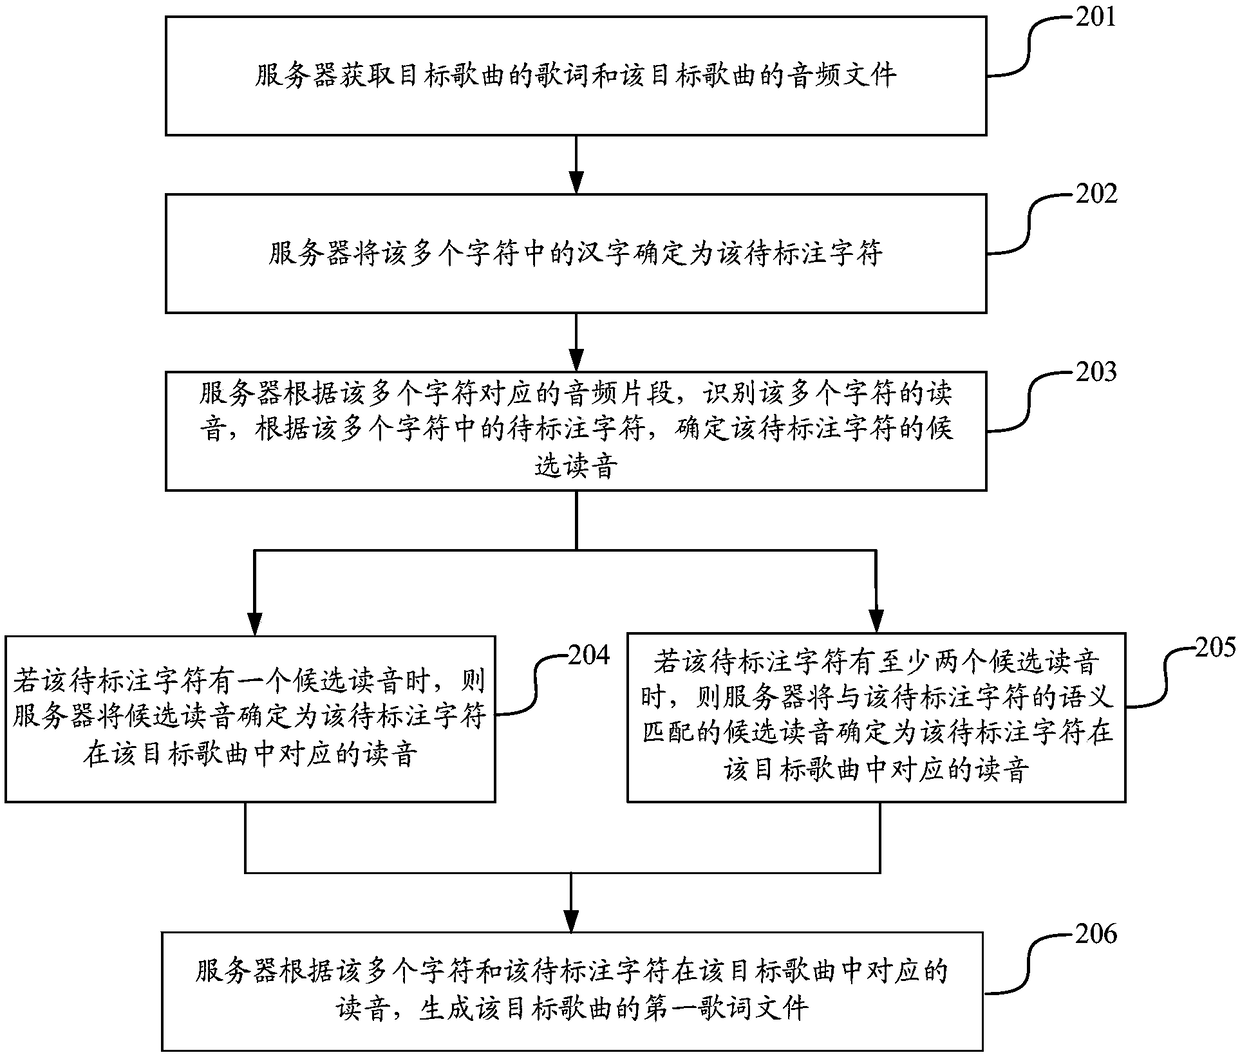 Method and apparatus for generating and displaying lyrics, electronic device and storage medium